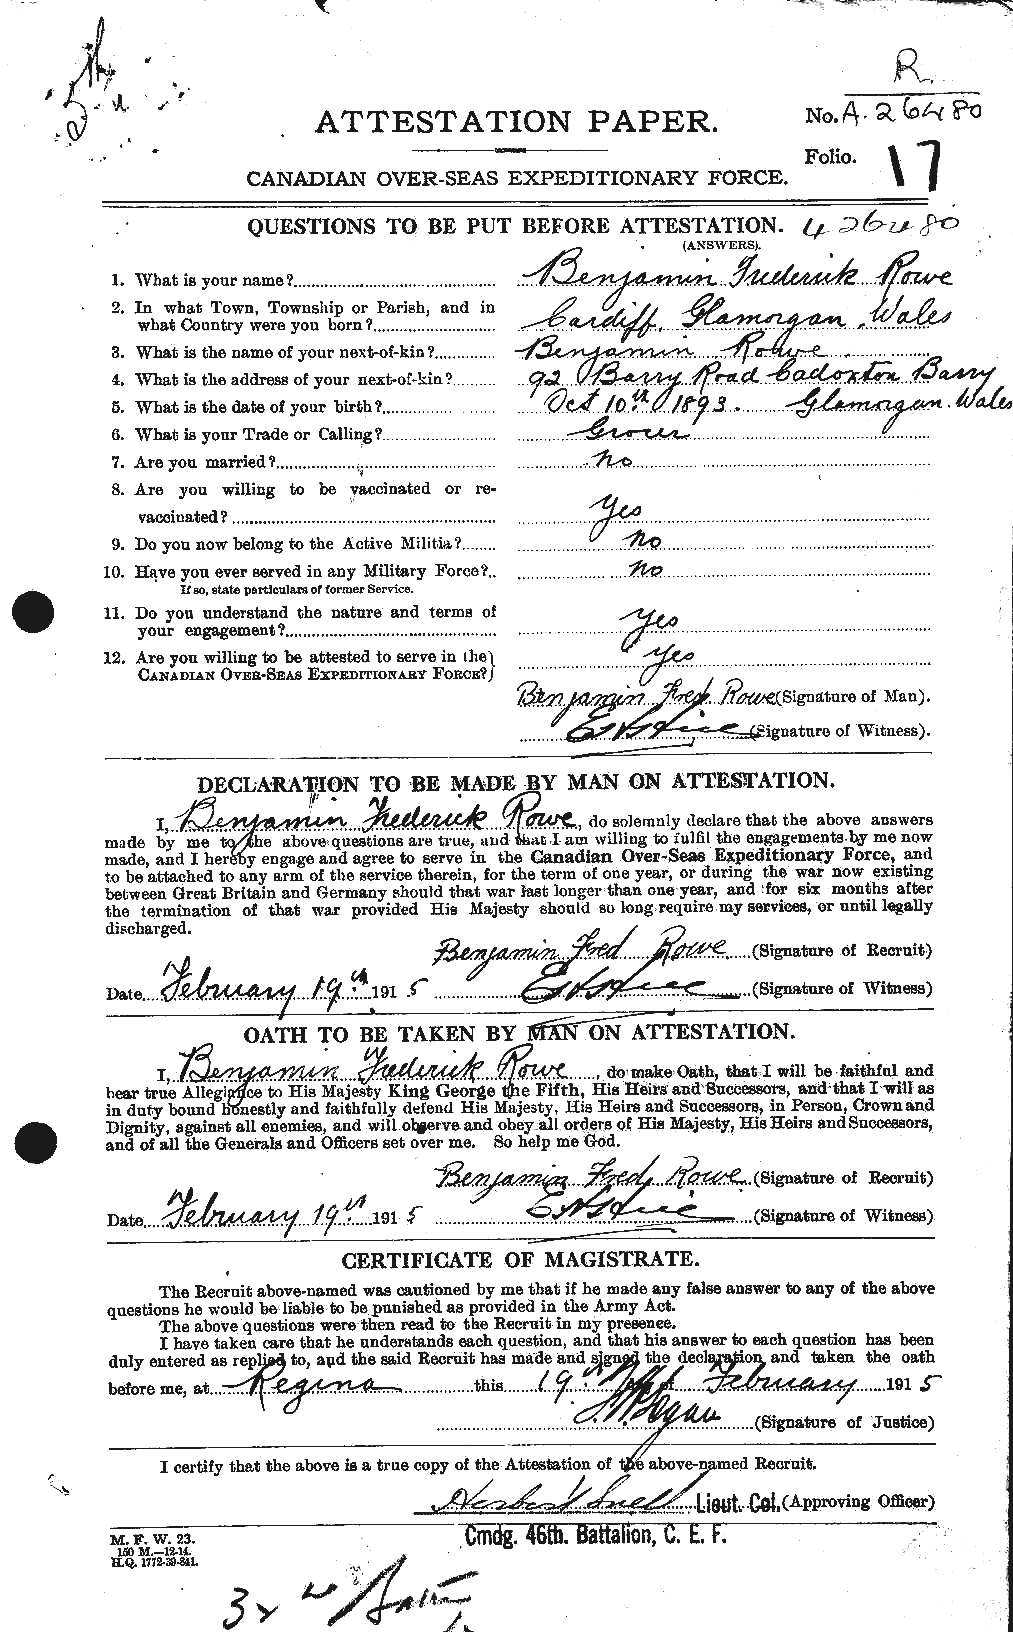 Personnel Records of the First World War - CEF 615806a